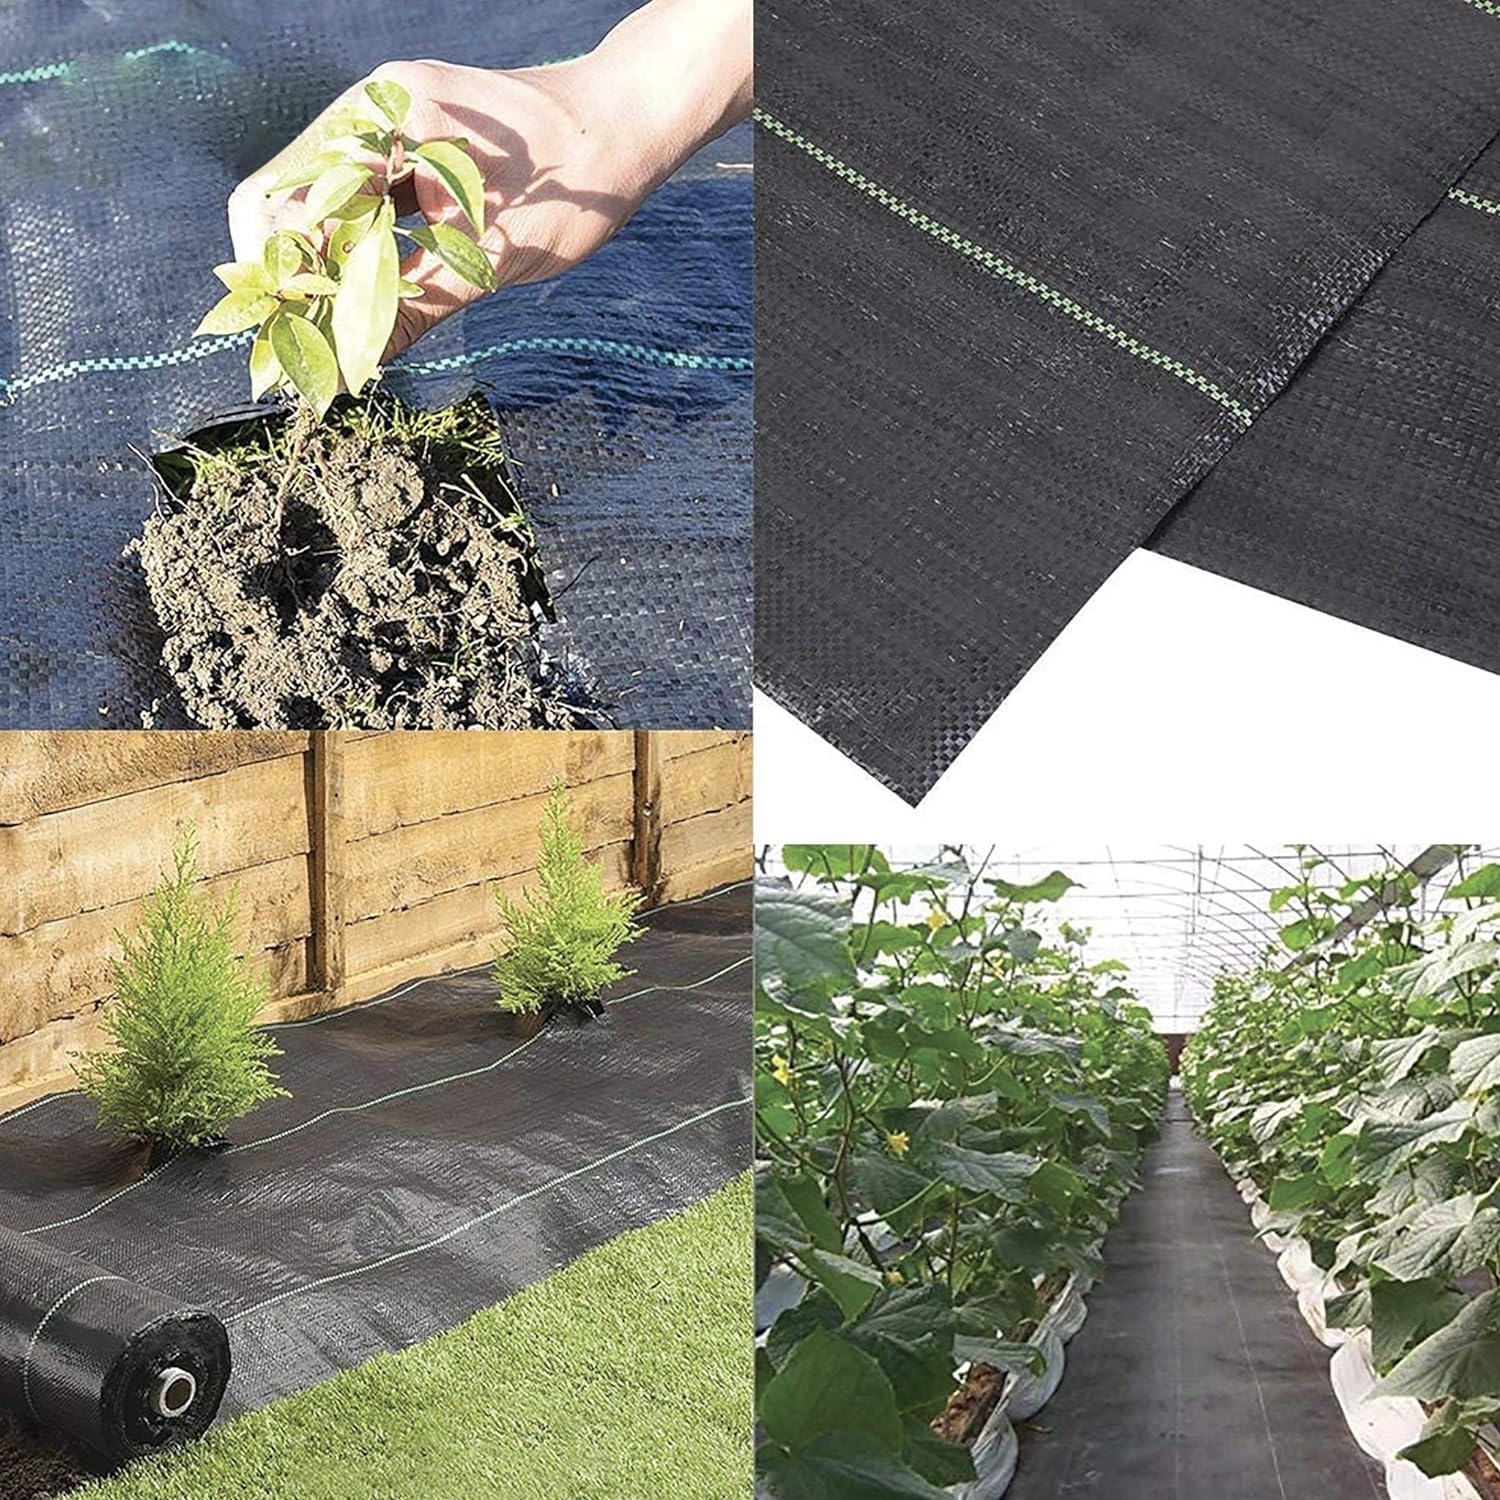 ADEPTNA Heavy Duty Garden Weed Control Fabric Membrane Made from Strong 100g/m² fabric with 50 Securing pegs - Ideal for use in Patios Garden Landscaping (2 X 10M + 50 PEGS)